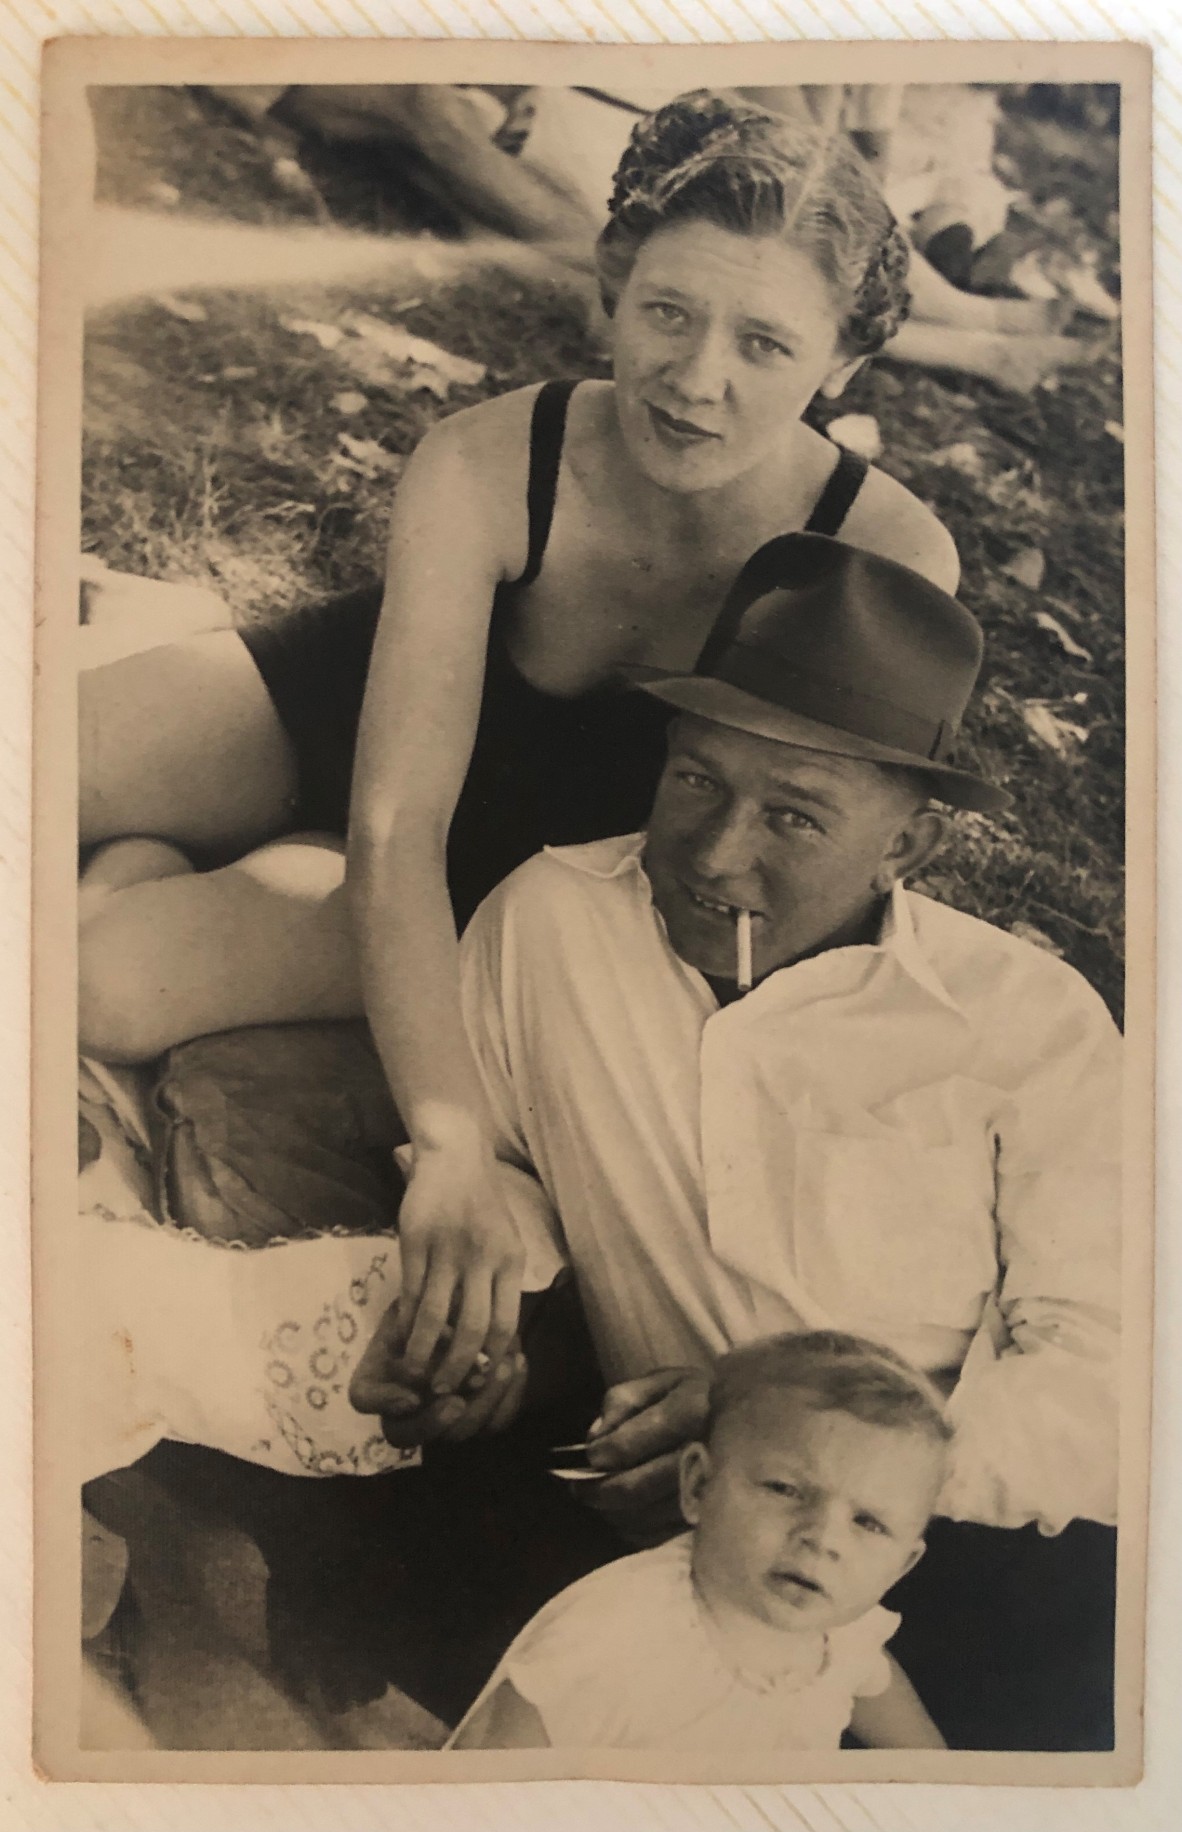 Image of Ethel with her husband and child post-war